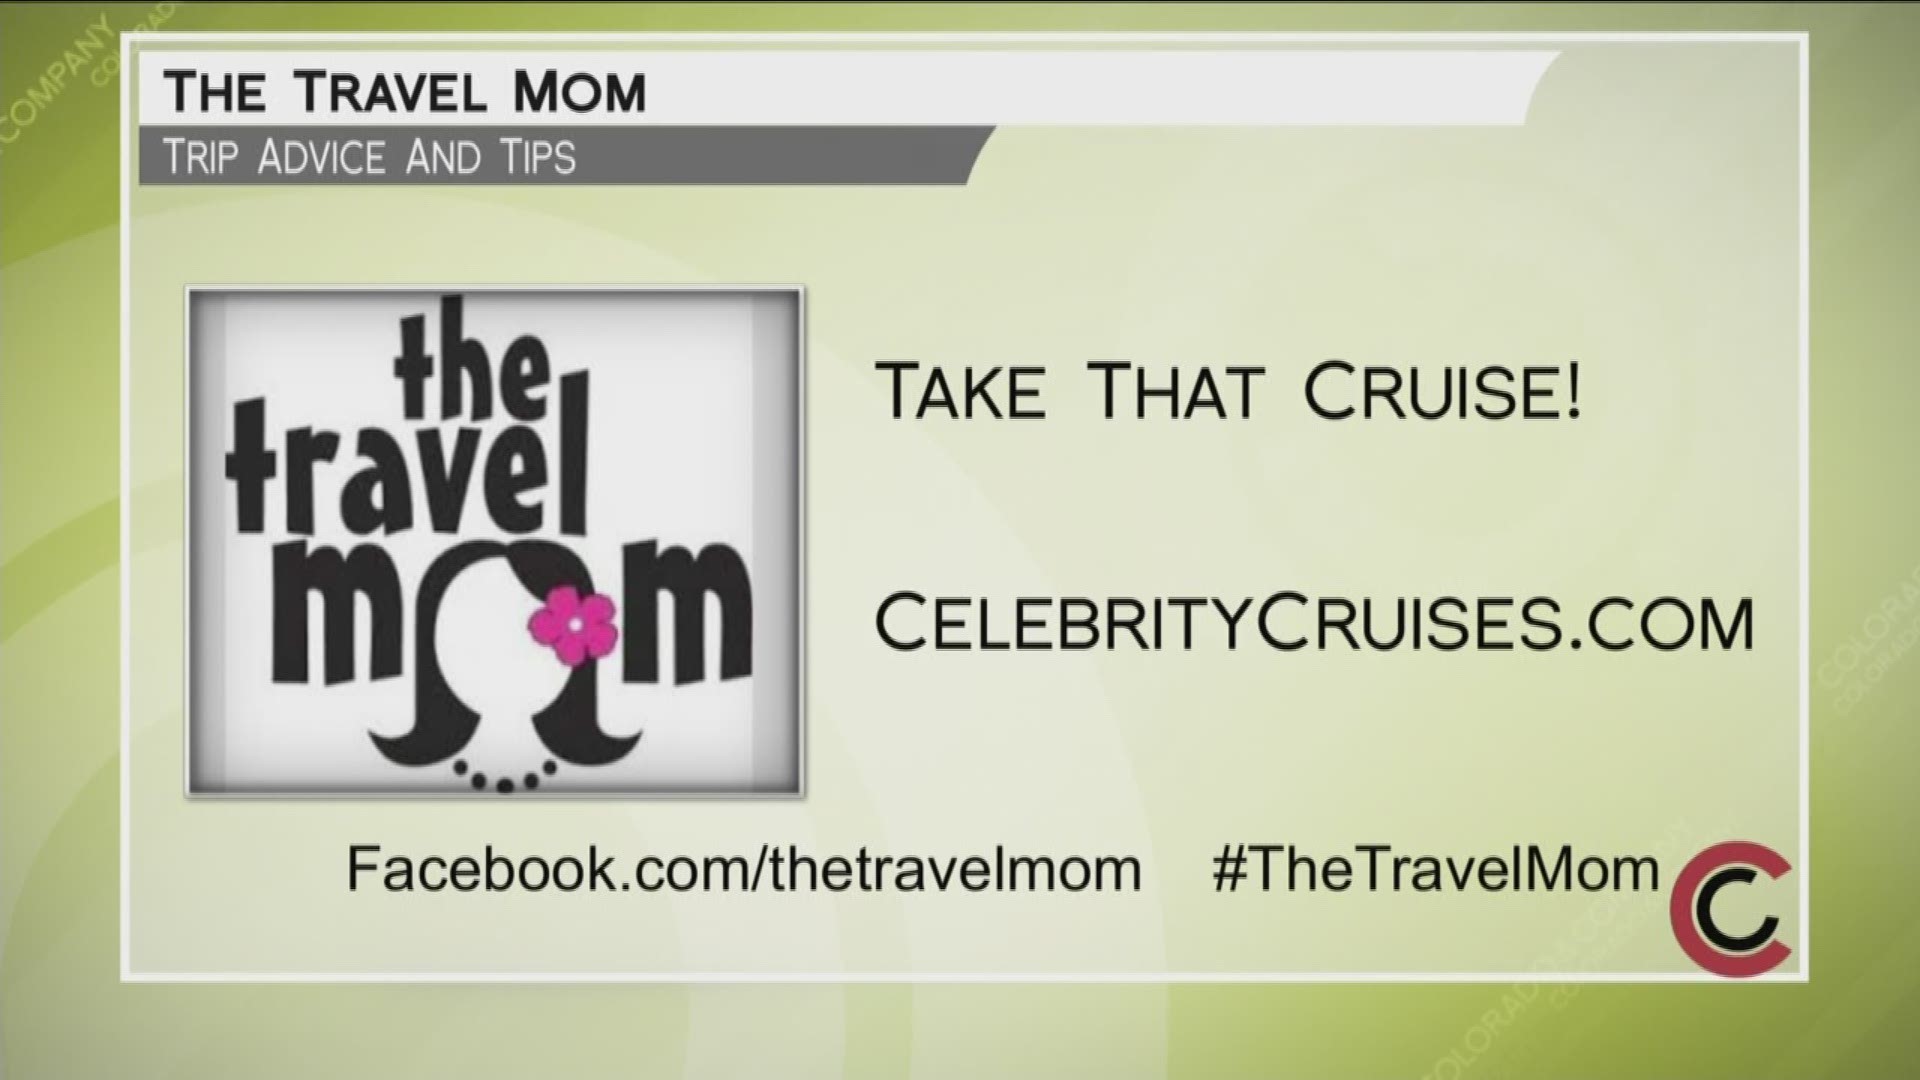 Learn more about the Travel Mom and get tips and even win a trip at TheTravelMom.com.